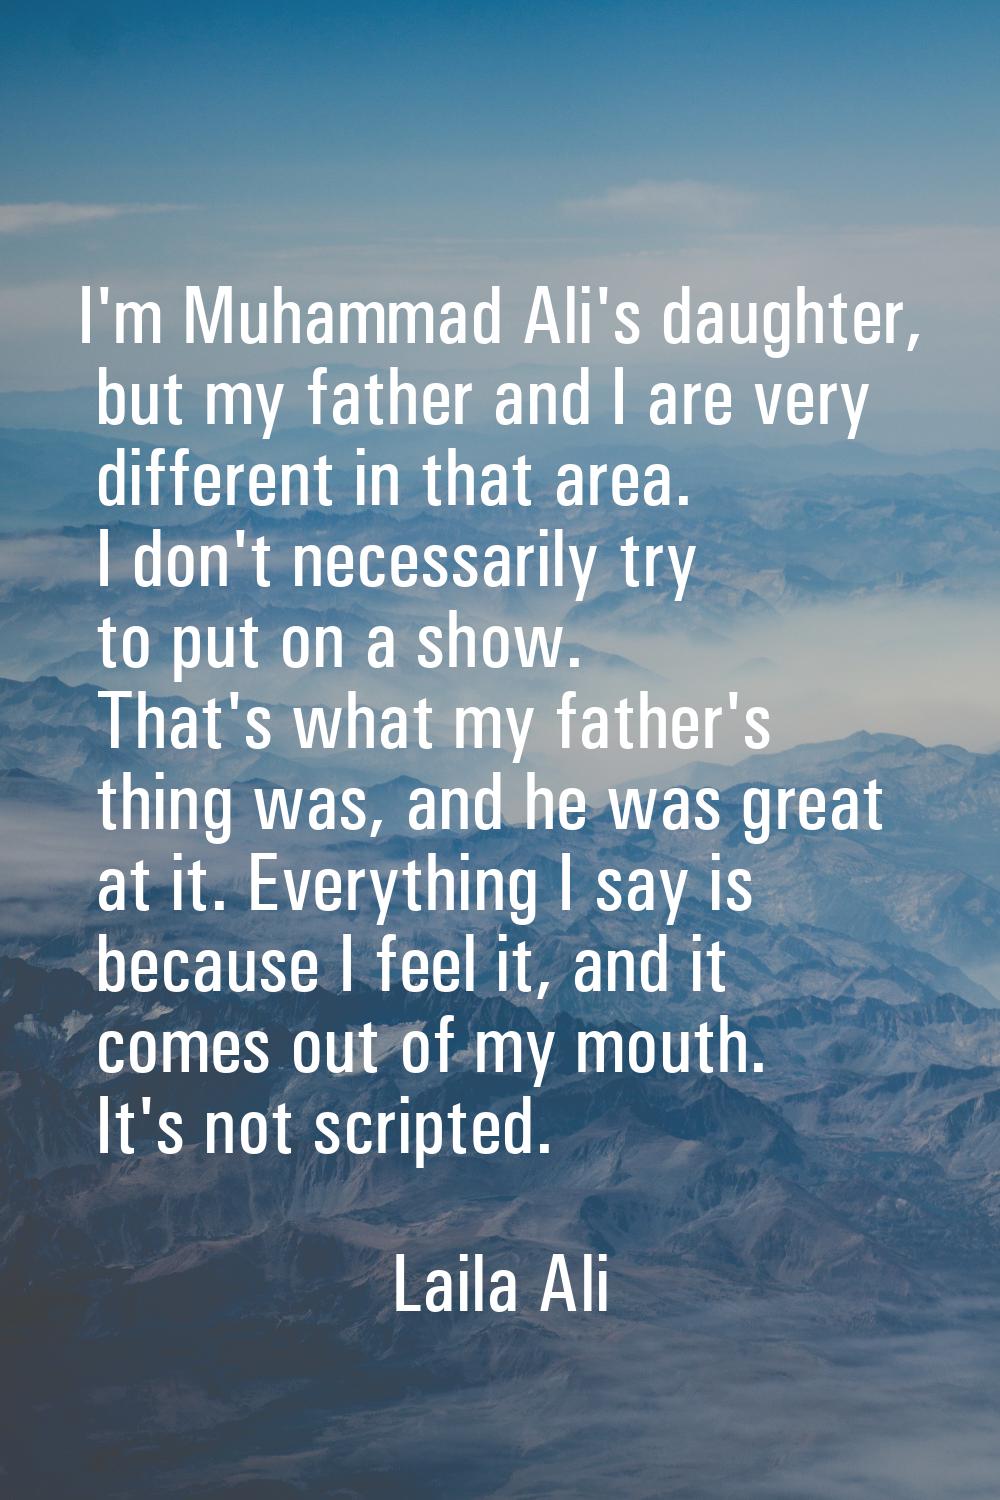 I'm Muhammad Ali's daughter, but my father and I are very different in that area. I don't necessari